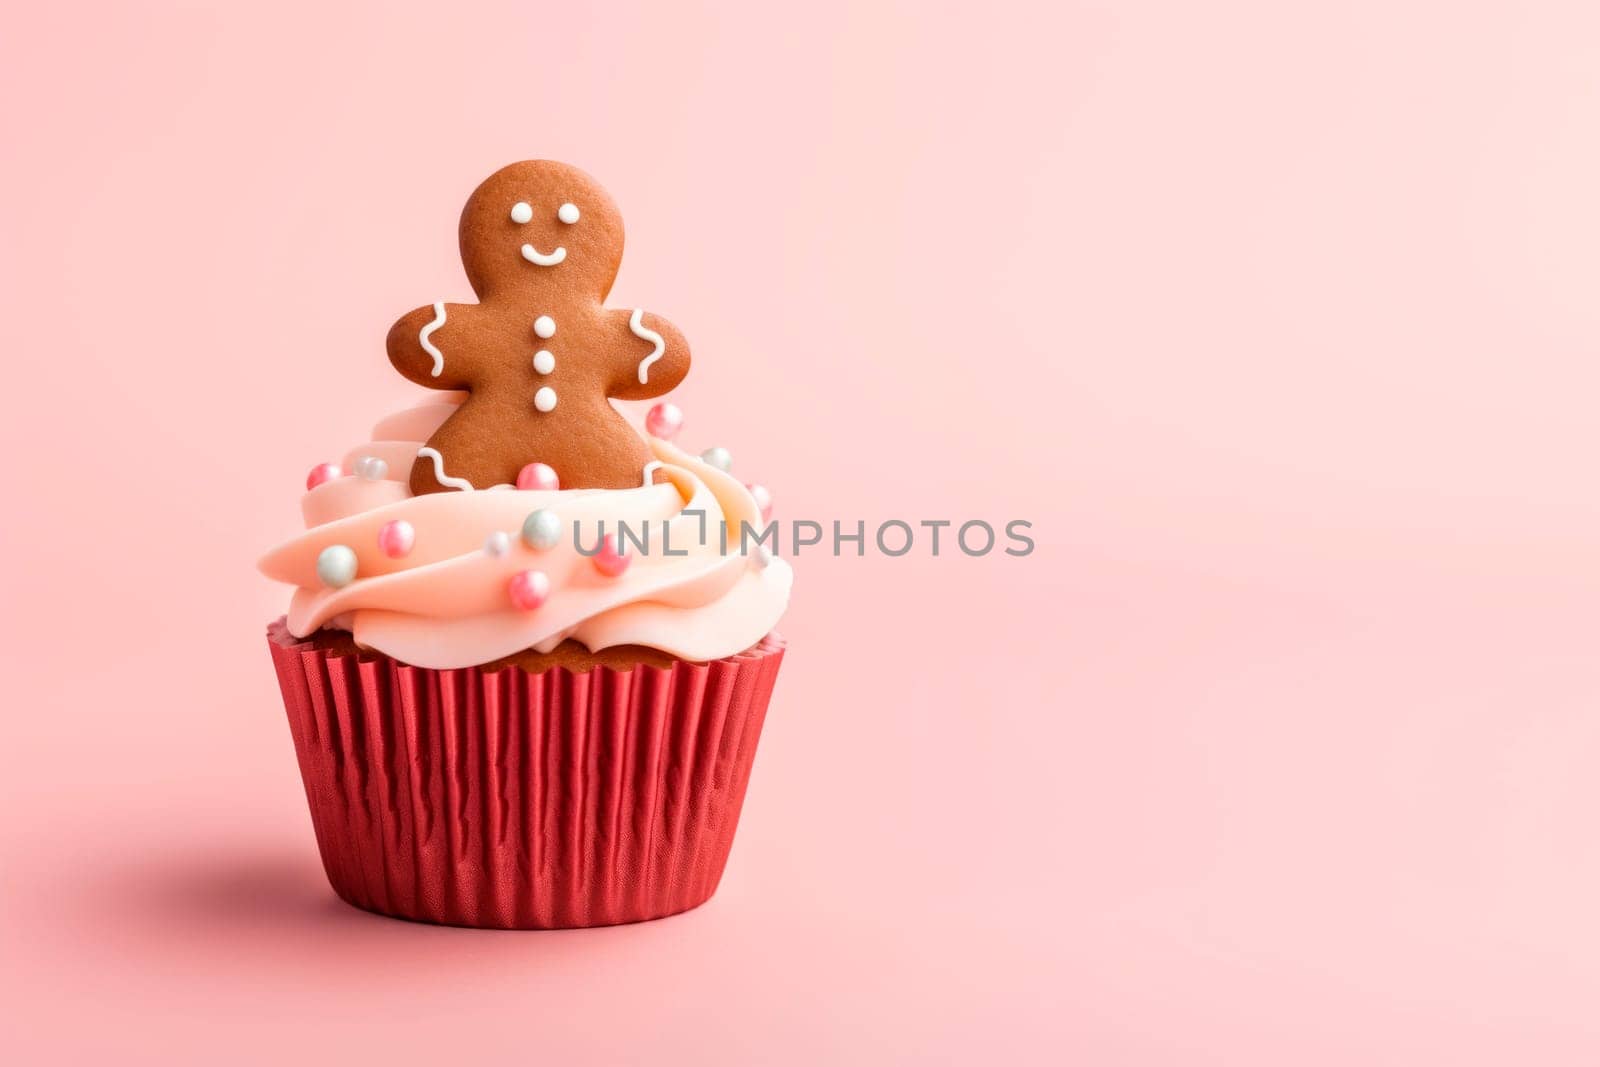 Christmas cupcake with gingerbread man decoration by Spirina